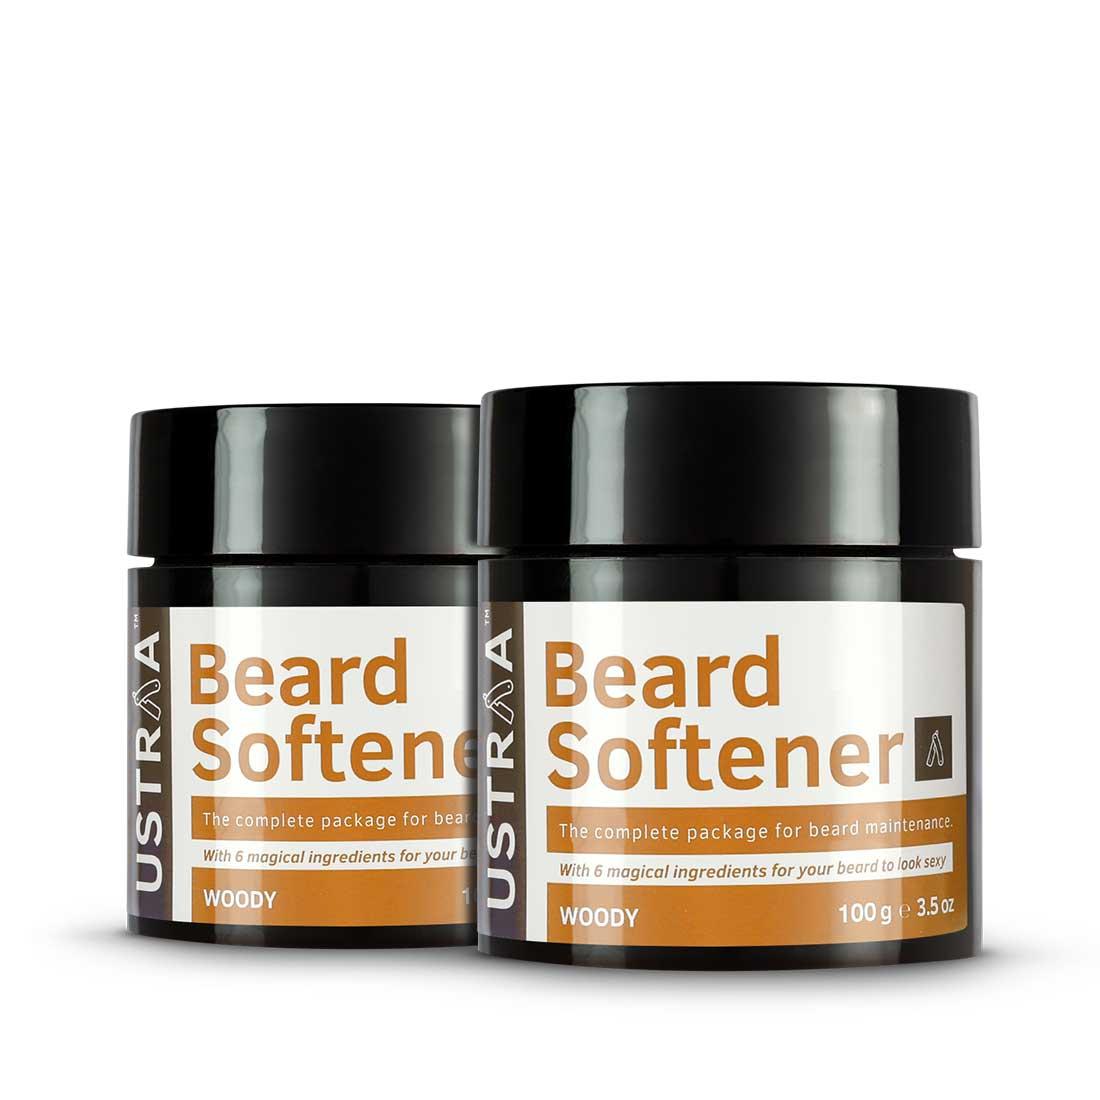 Ustraa Beard Softener Woody - Set of 2 - With 6 Magical Ingredients for a Nourished, Soft, and Healthy Beard that adds Shine and Swag